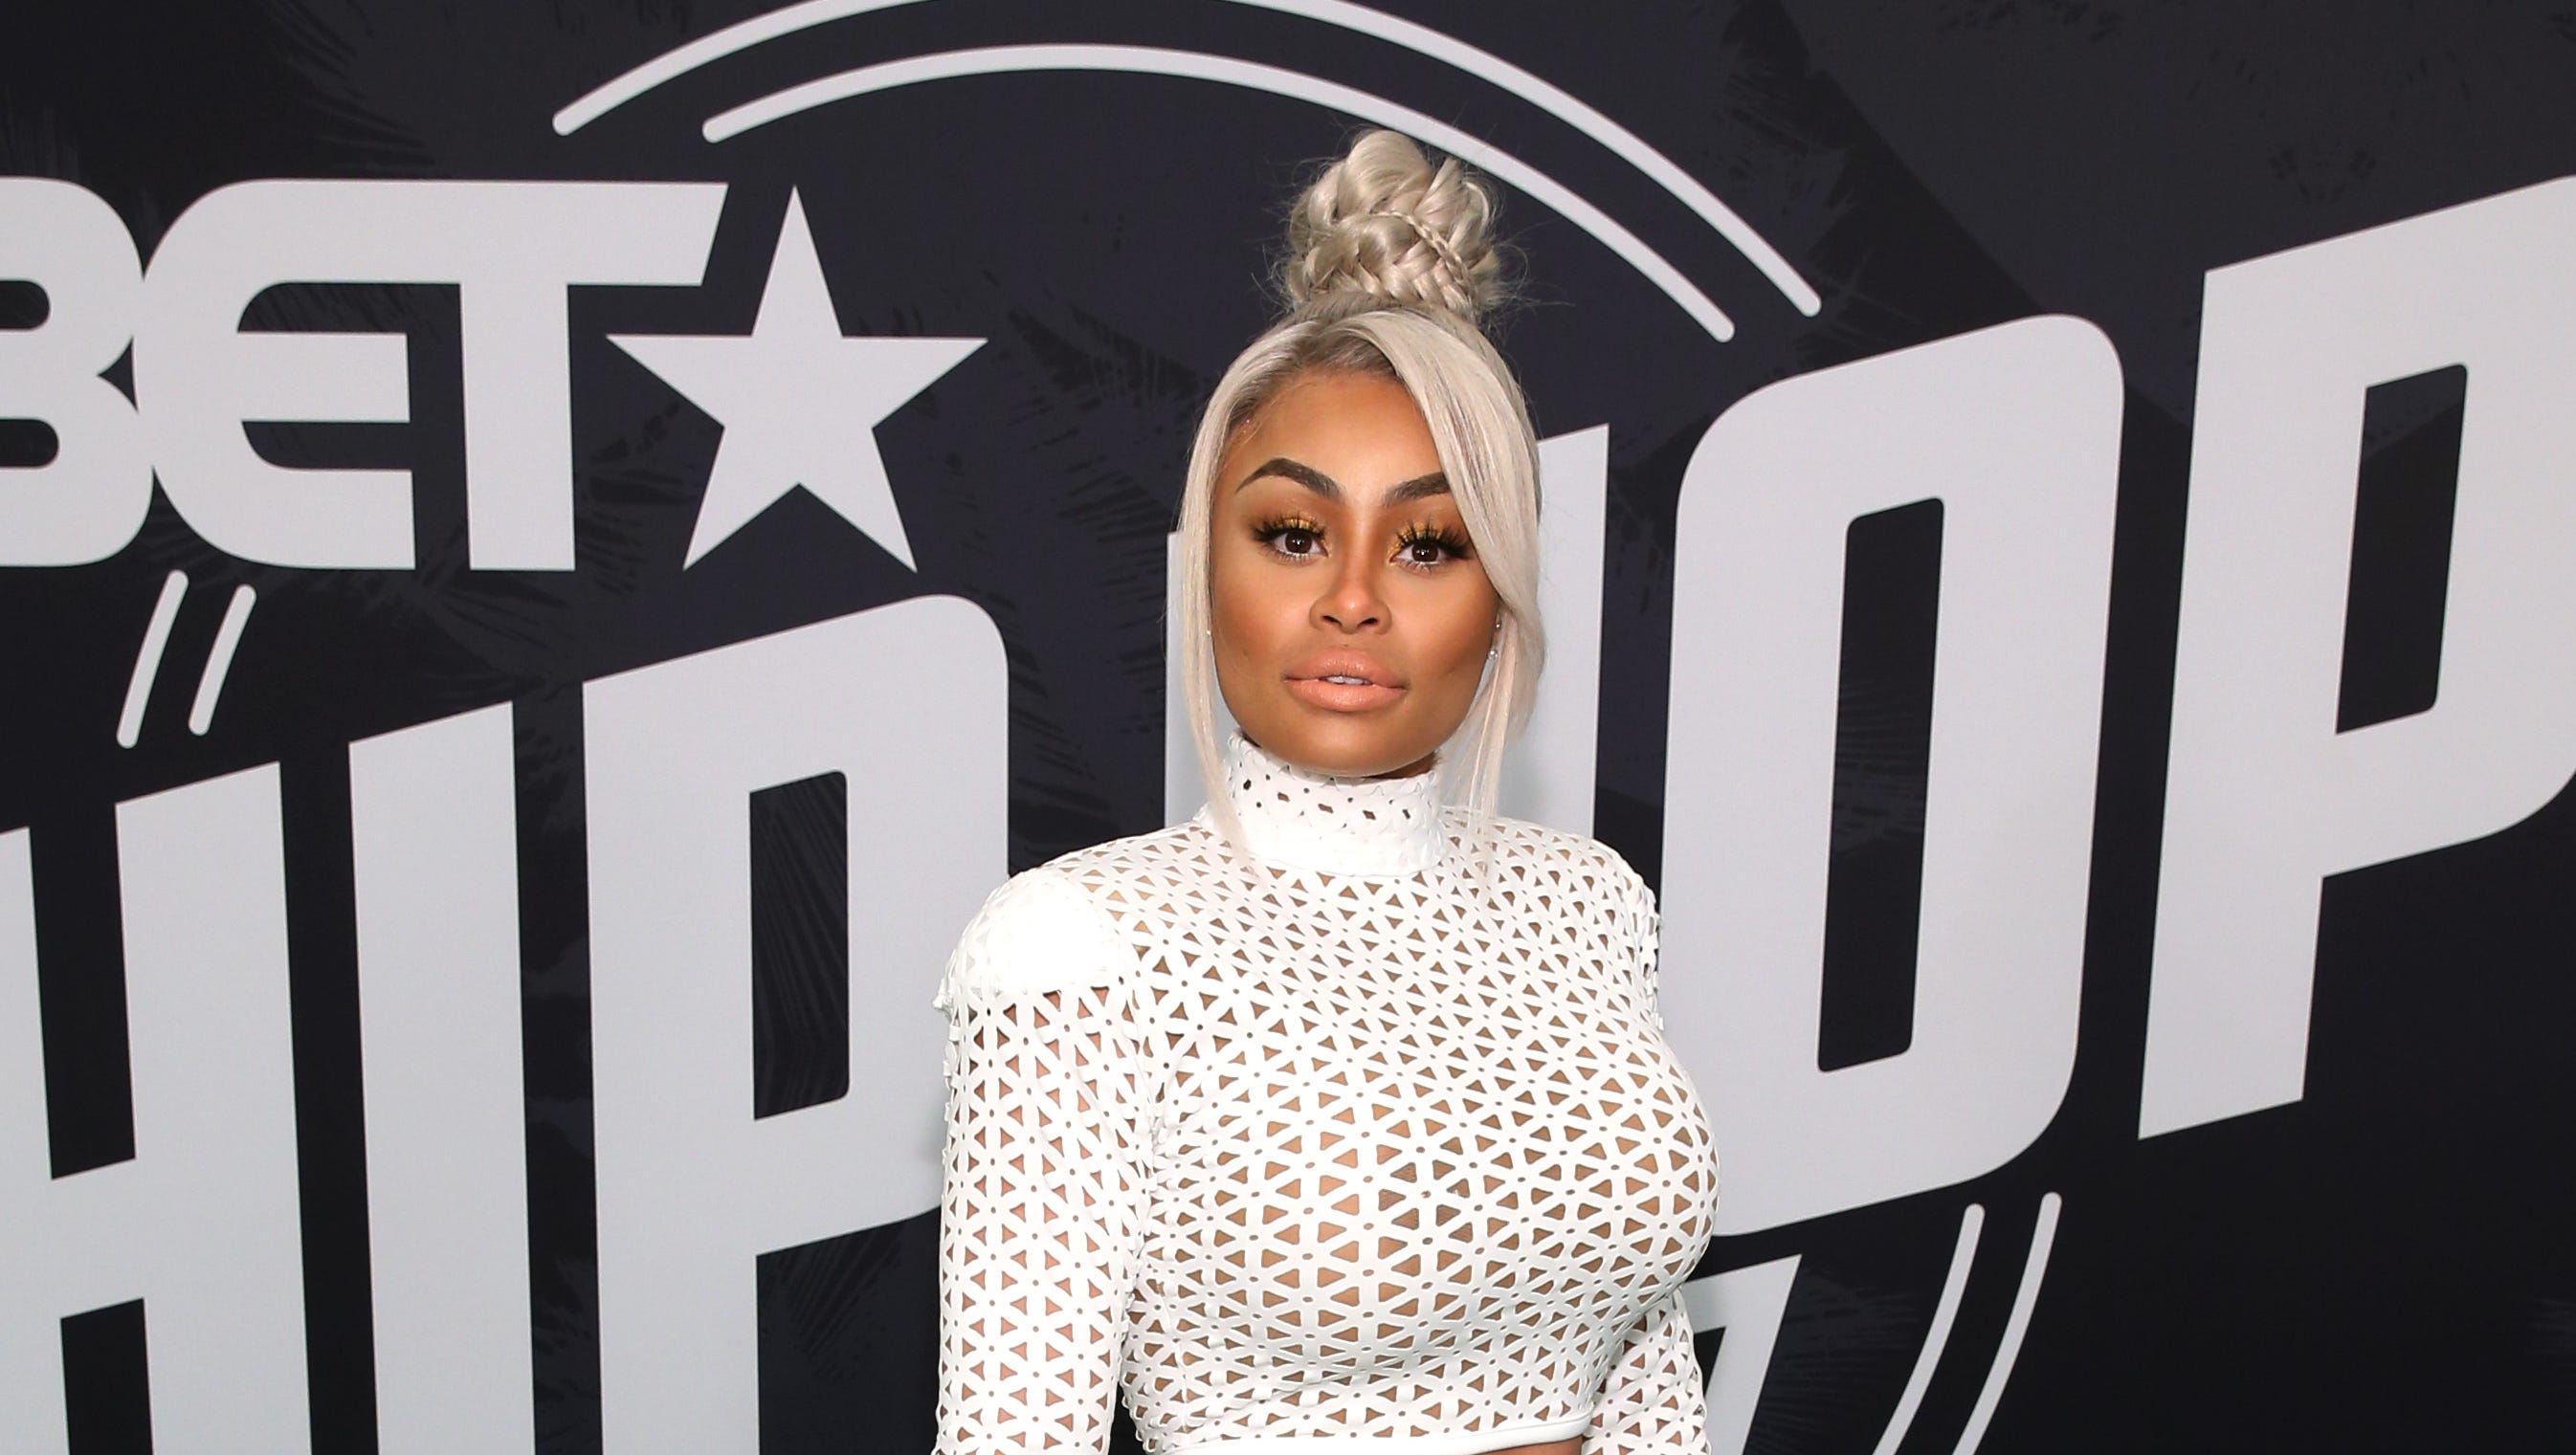 Maa Beta Rape Sex Video - Blac Chyna will ask police to investigate leaked sex tape